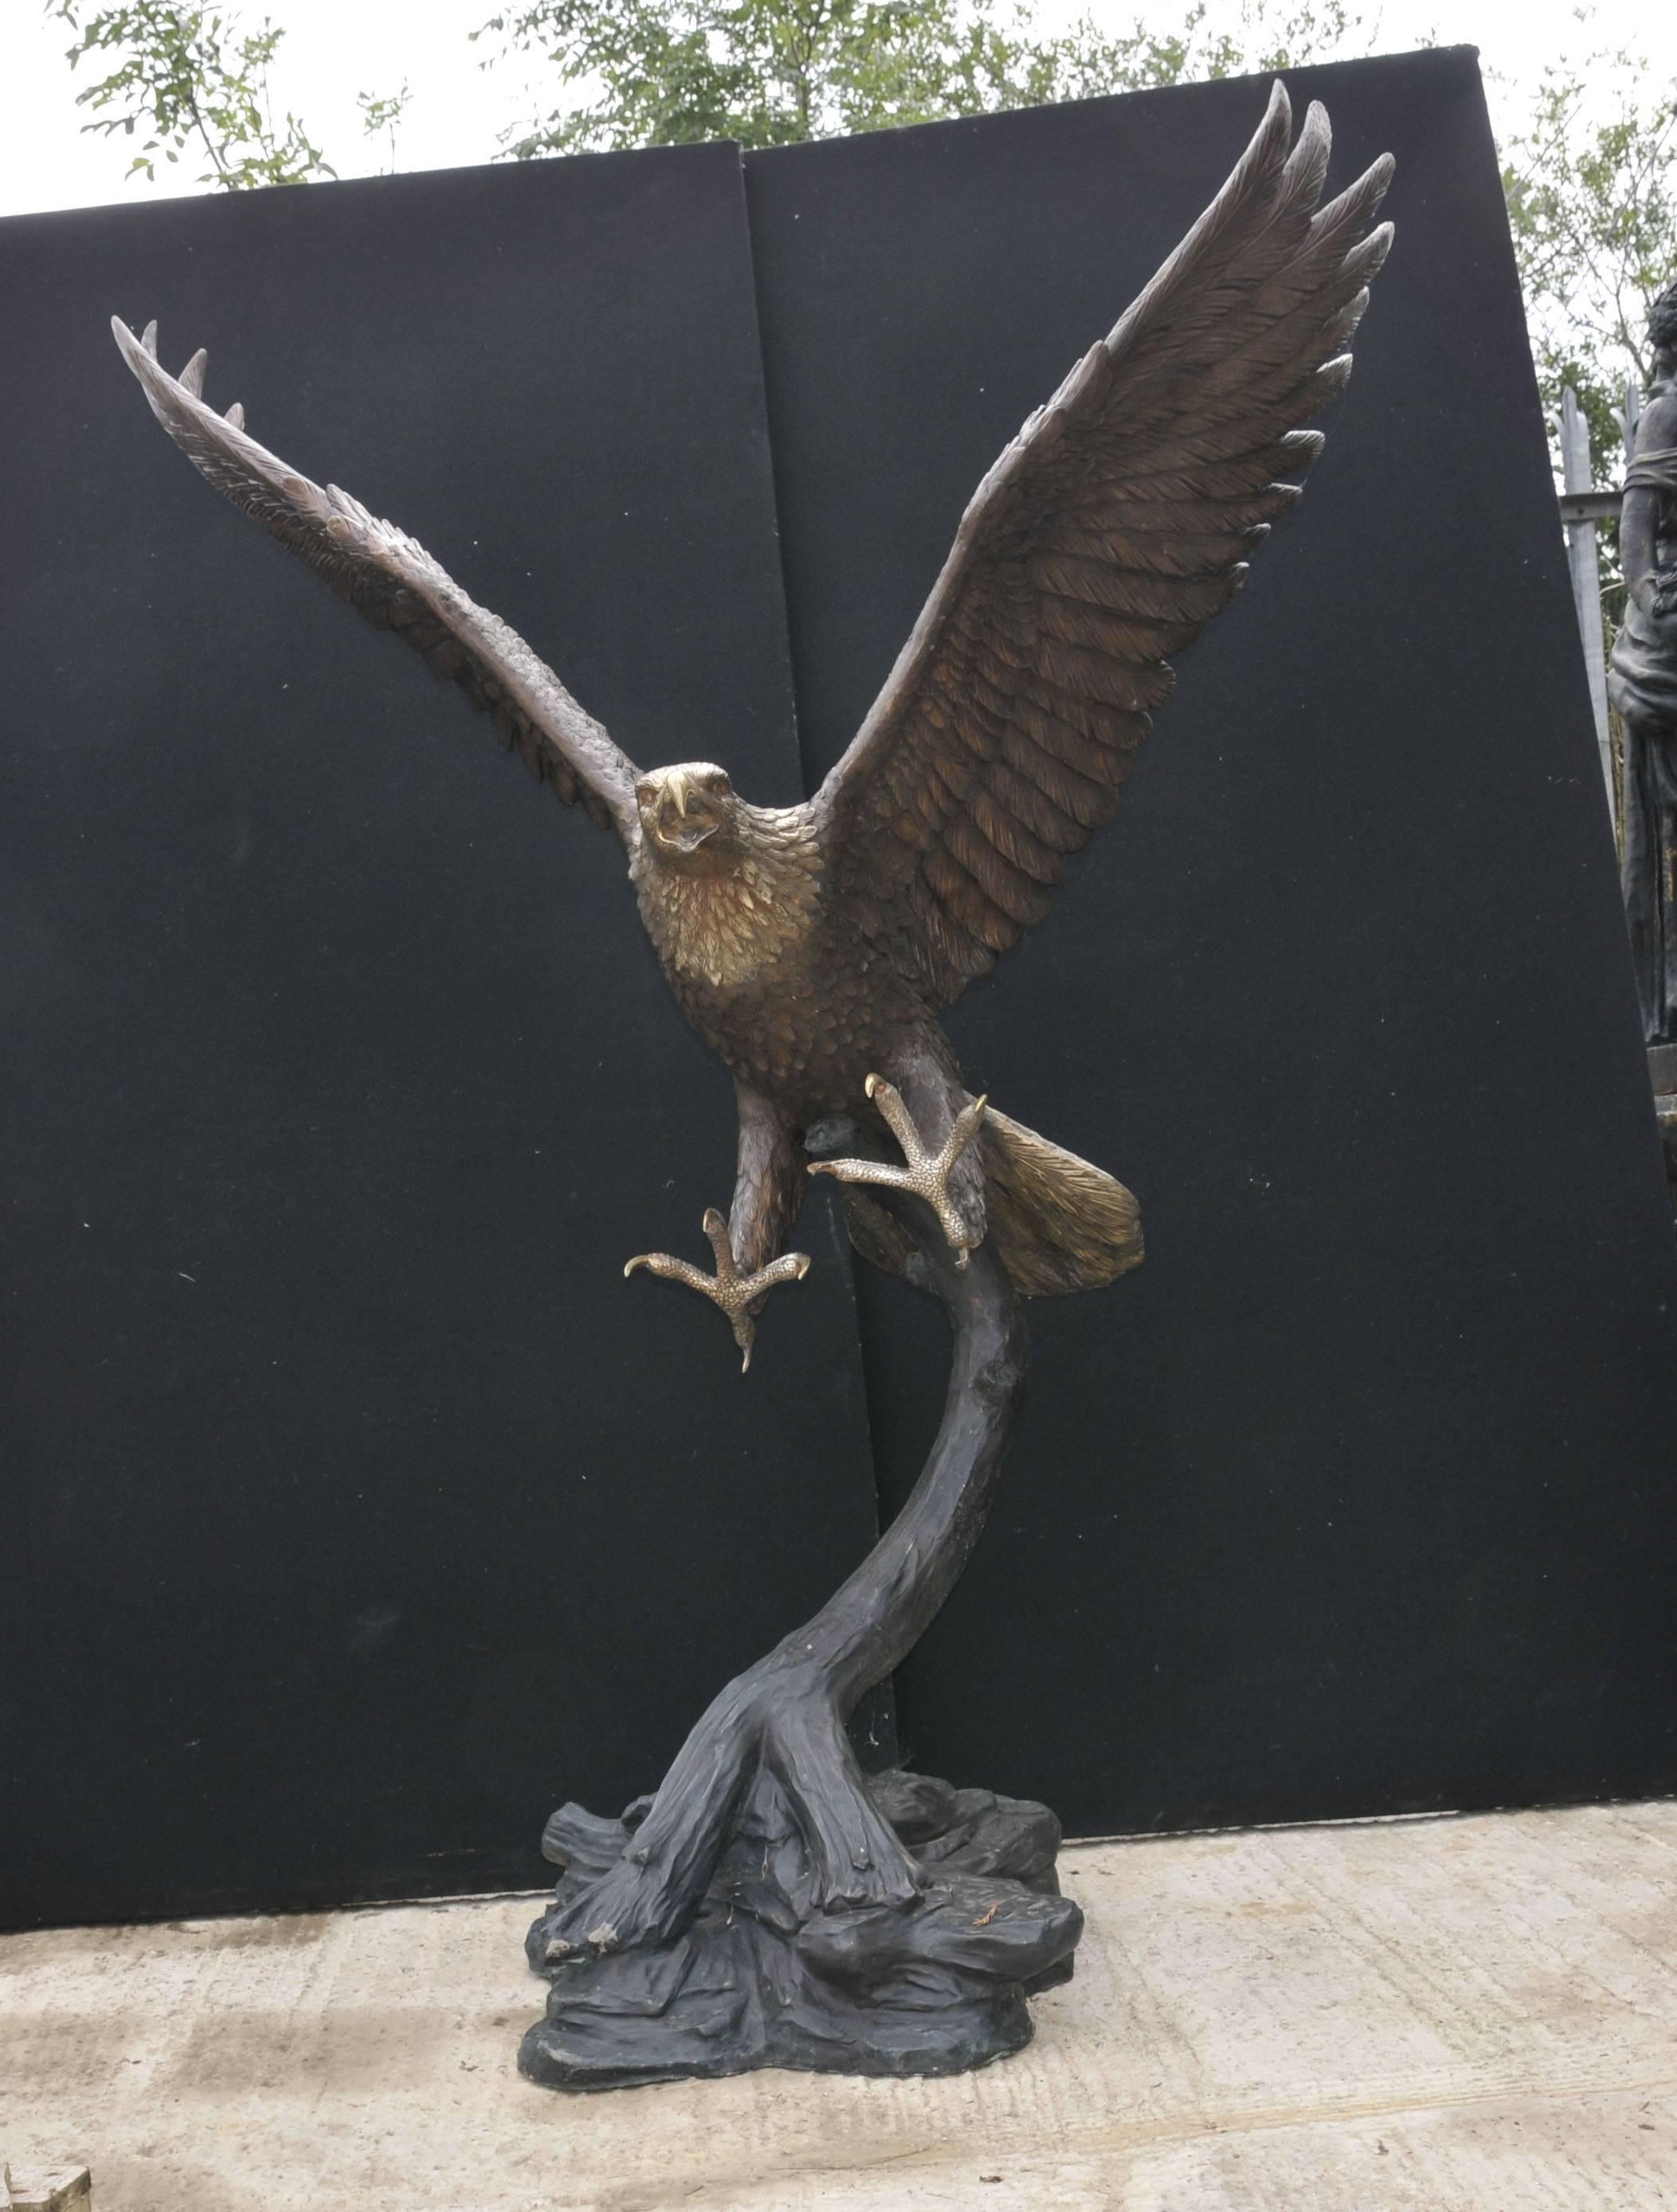 Large bronze statue of an American bald eagle.
At just under three feet tall good size to this beautiful bird of prey.
Love the patina to the different colored bronze.
This has been made using the lost wax method so true bronze.
Love the texture